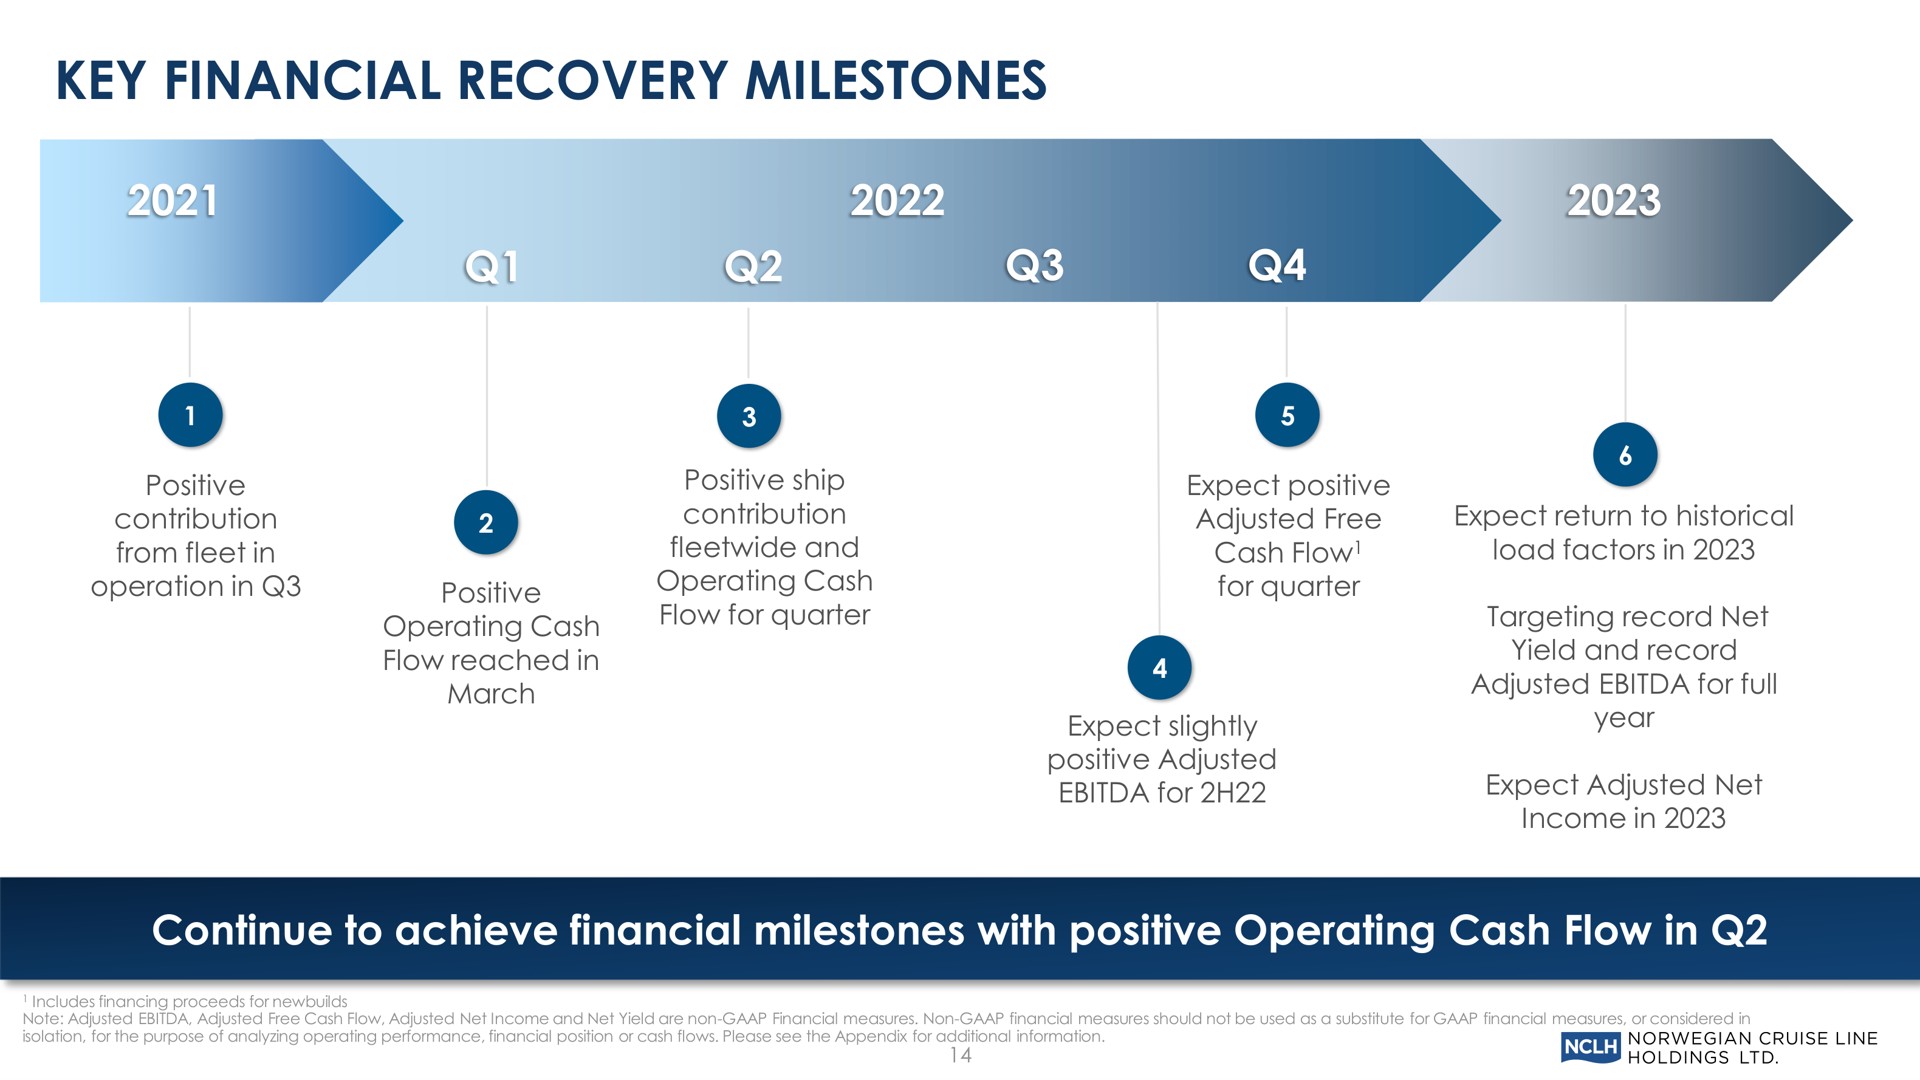 key financial recovery milestones continue to achieve financial milestones with positive operating cash flow in | Norwegian Cruise Line